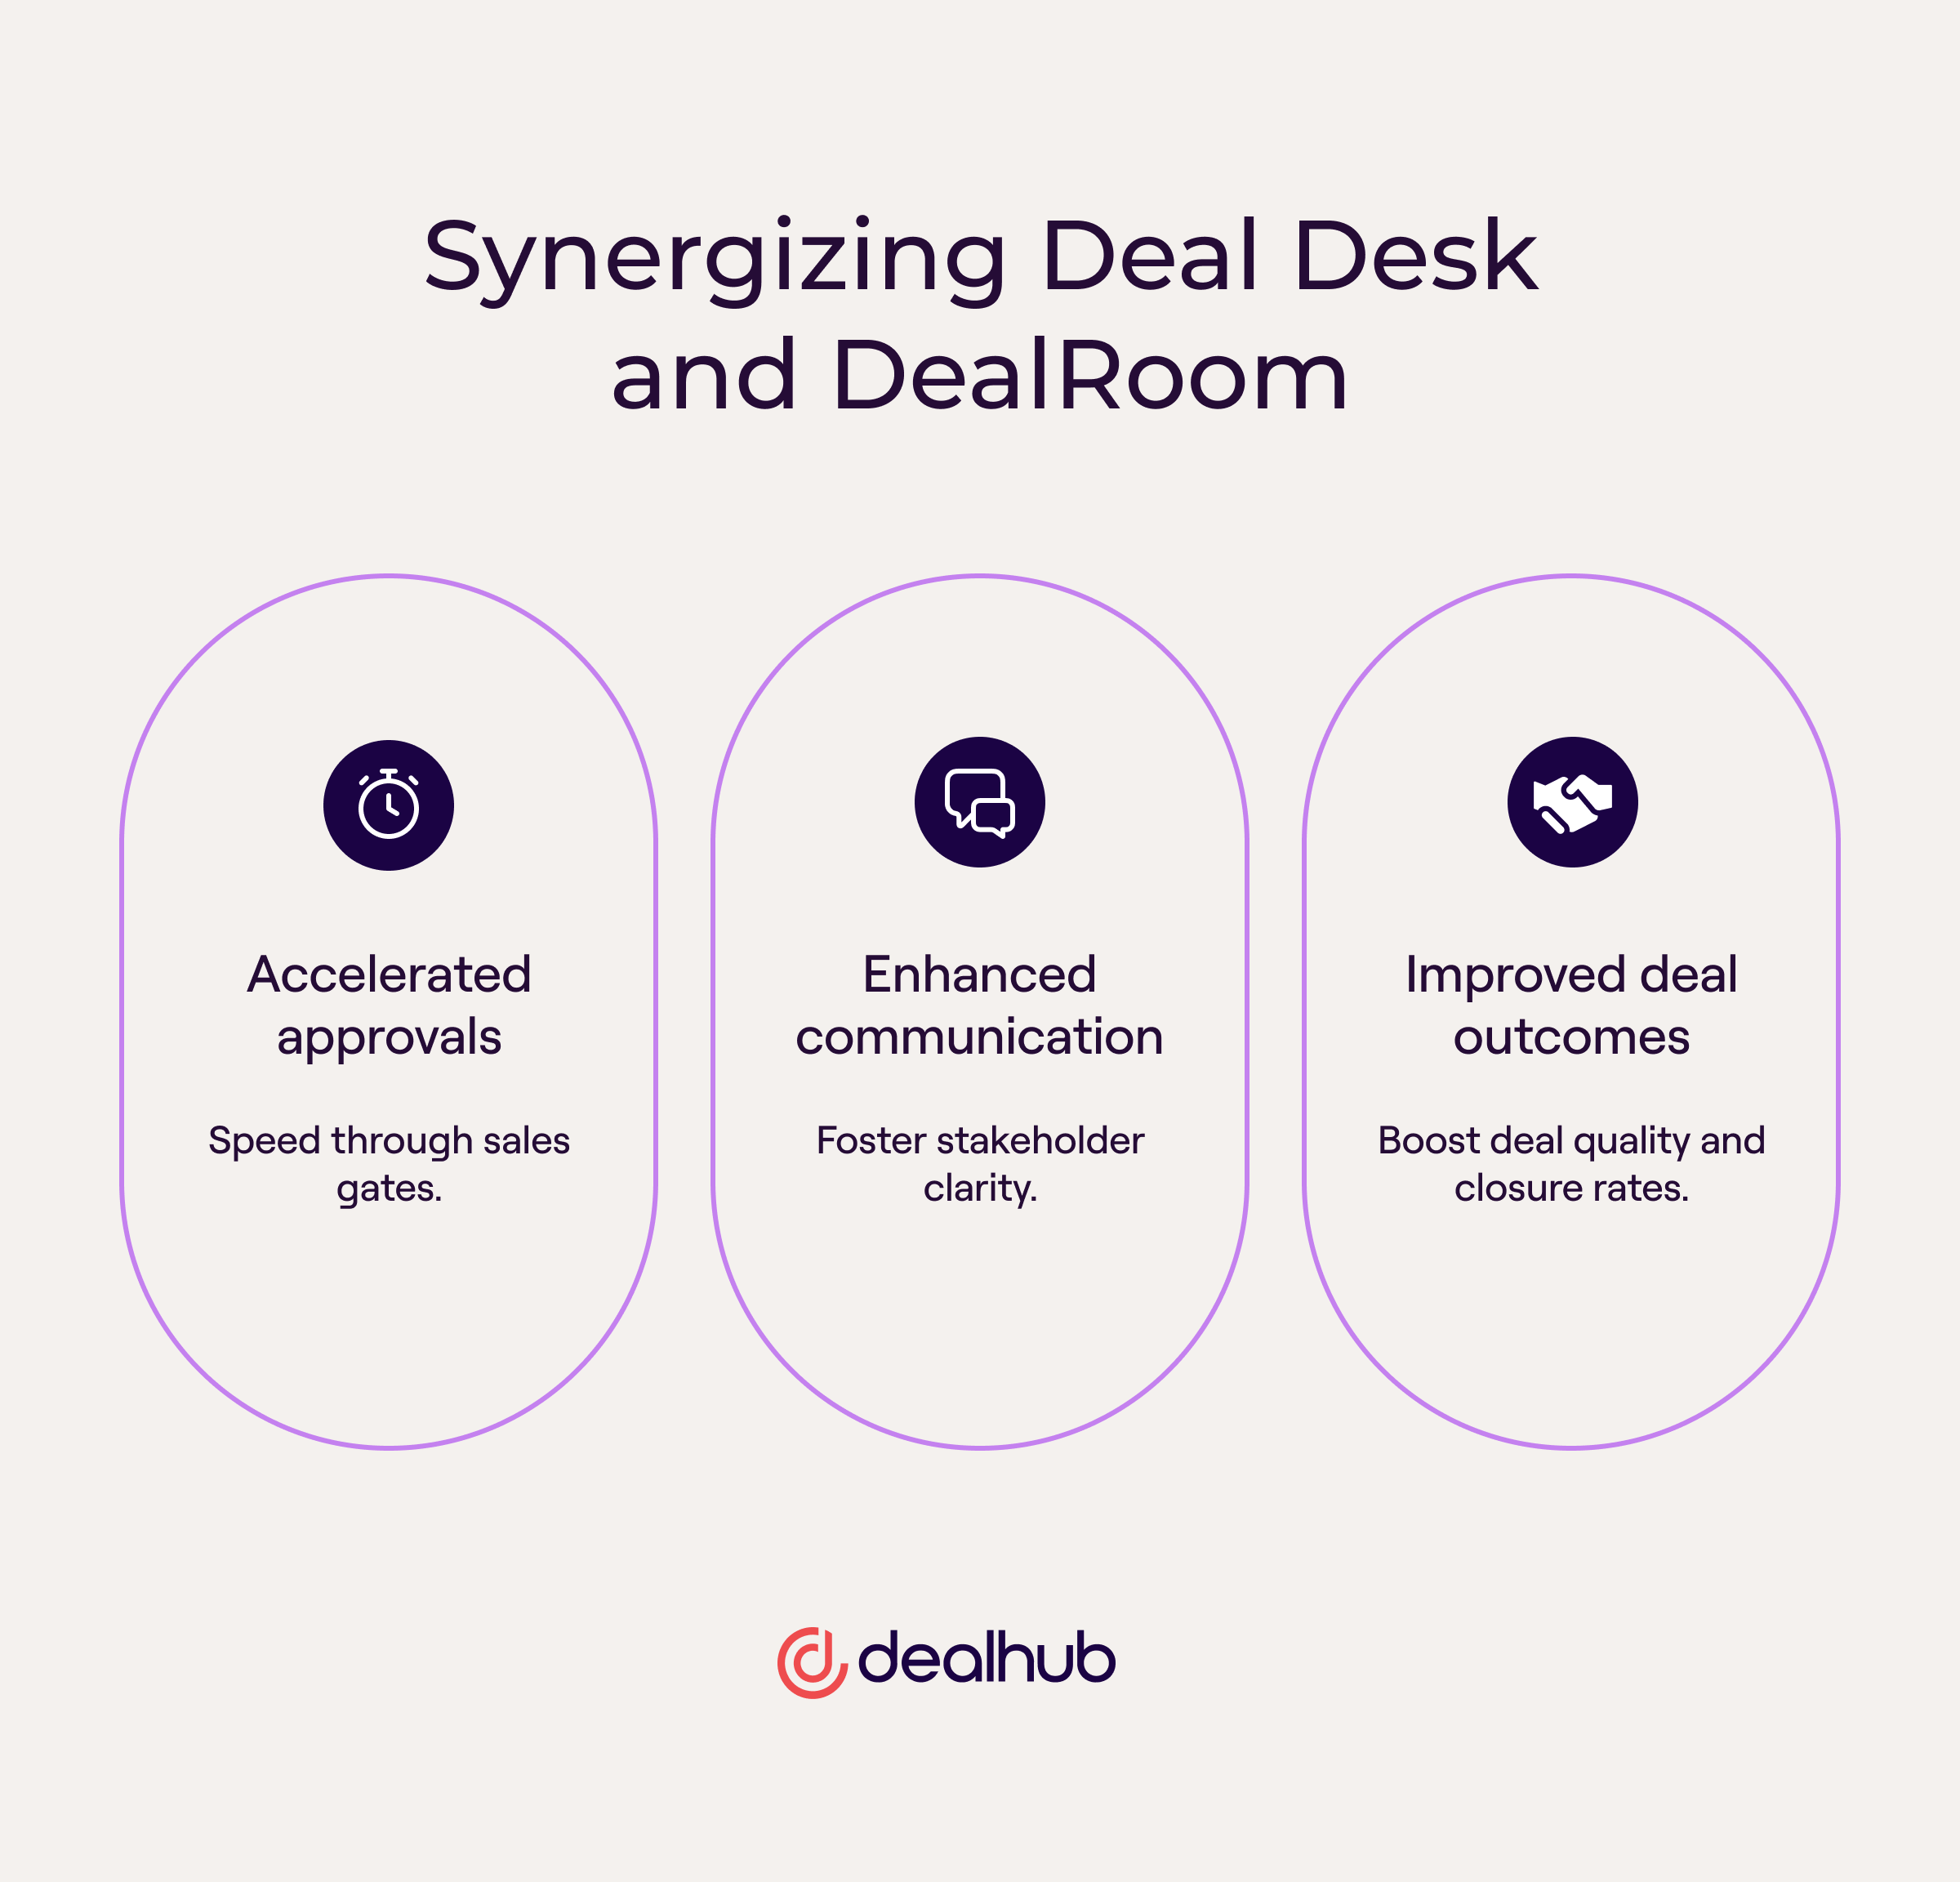 Synergizing Deal Desk and DealRoom